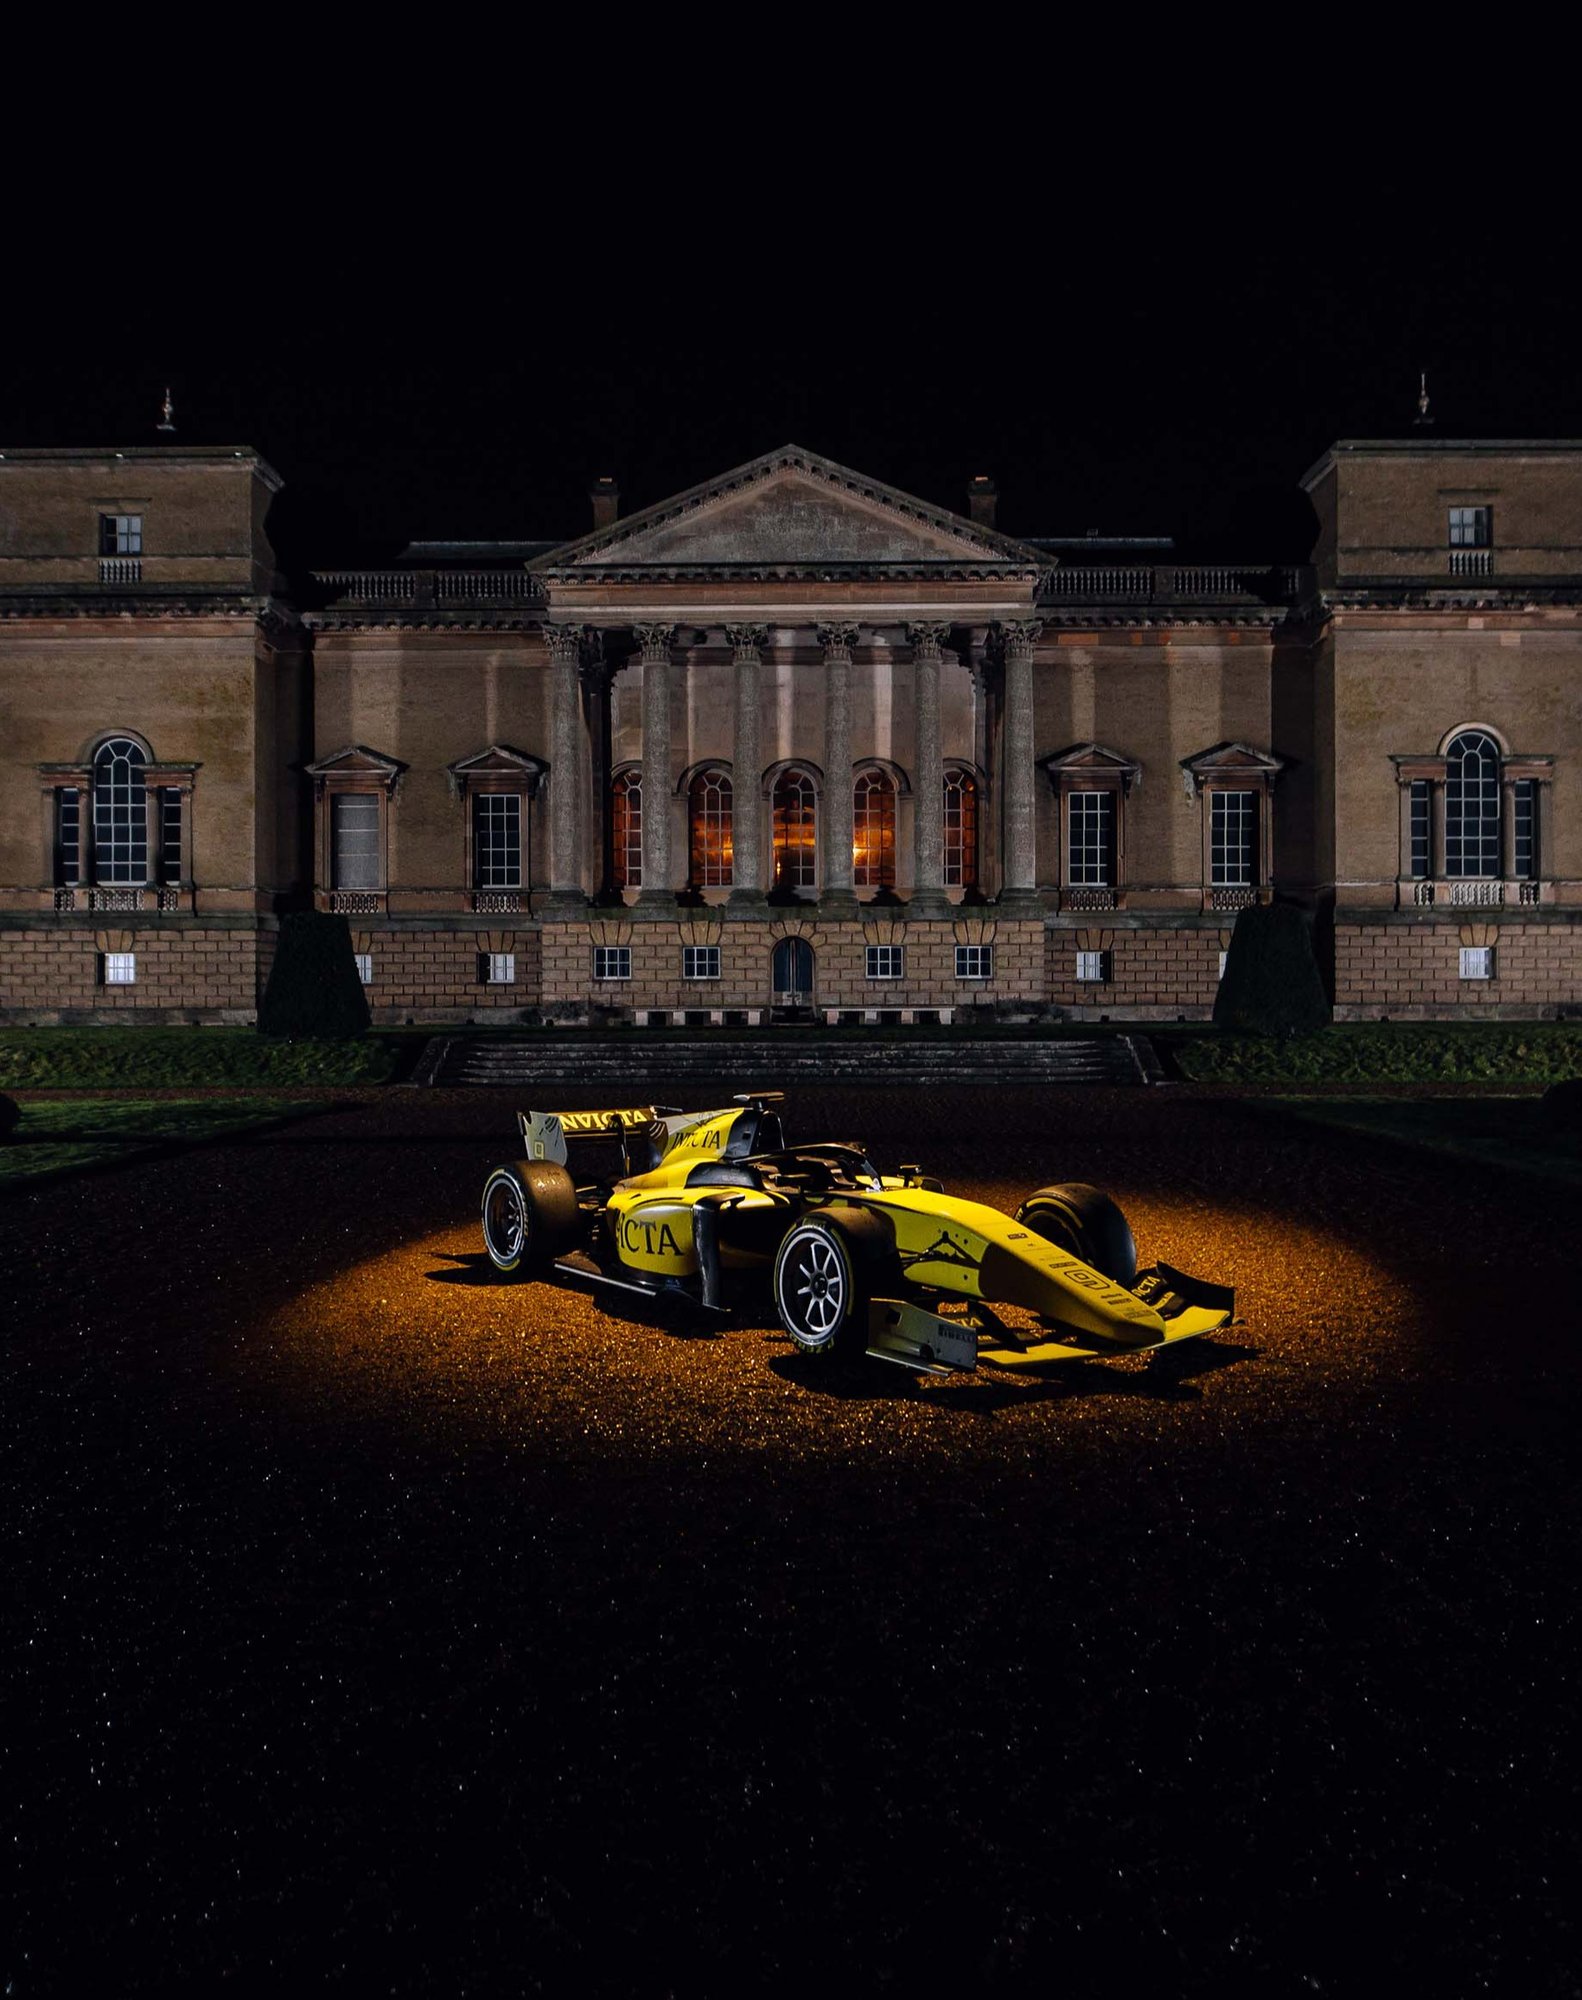 Invicta Racing car is outside in spotlight for Holkham Hall